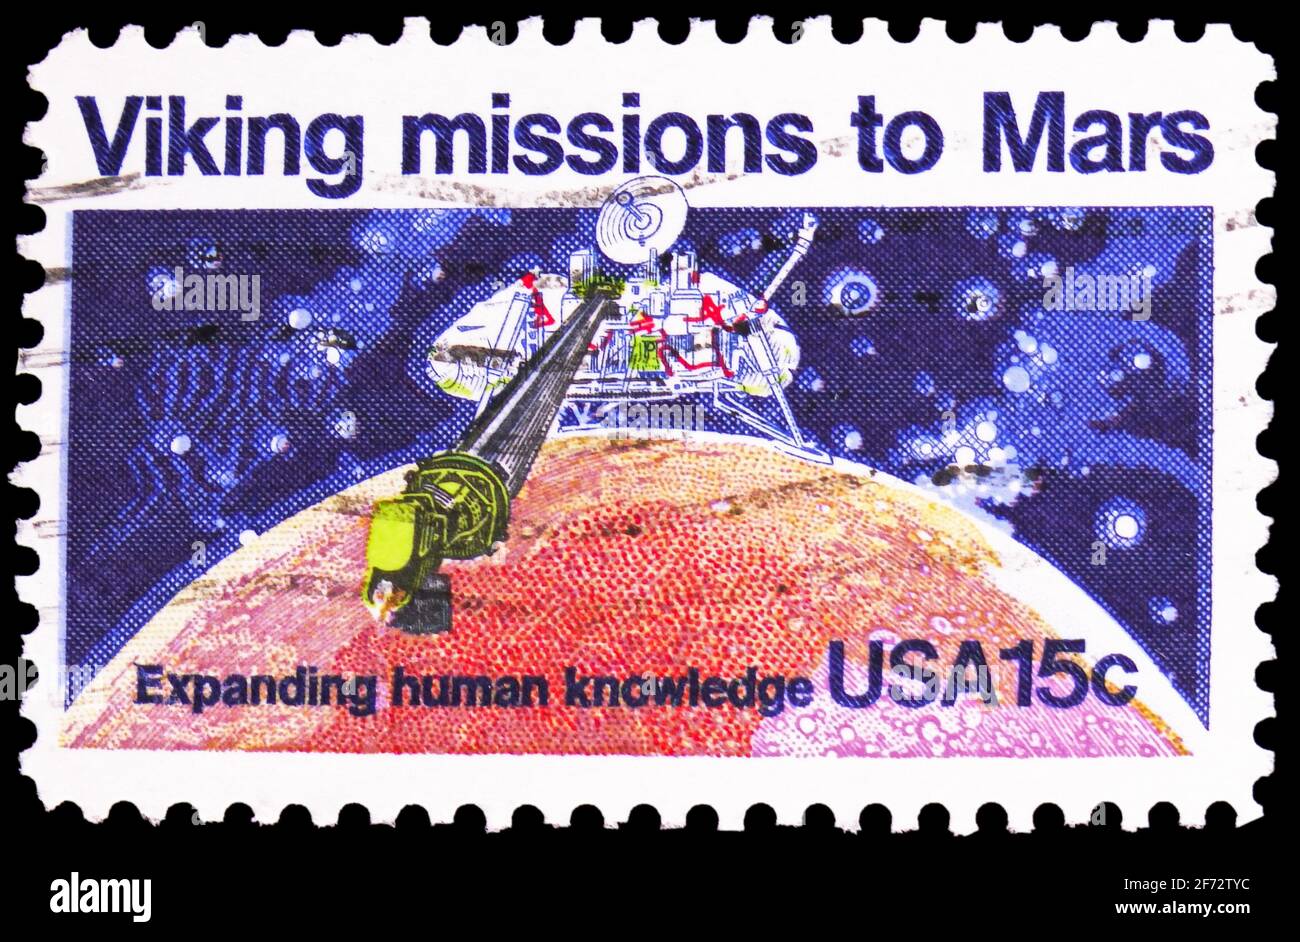 MOSCOW, RUSSIA - JANUARY 12, 2021: Postage stamp printed in United States shows Viking 1 Lander Scooping Up Soil on Mars, Viking Missions to Mars Issu Stock Photo